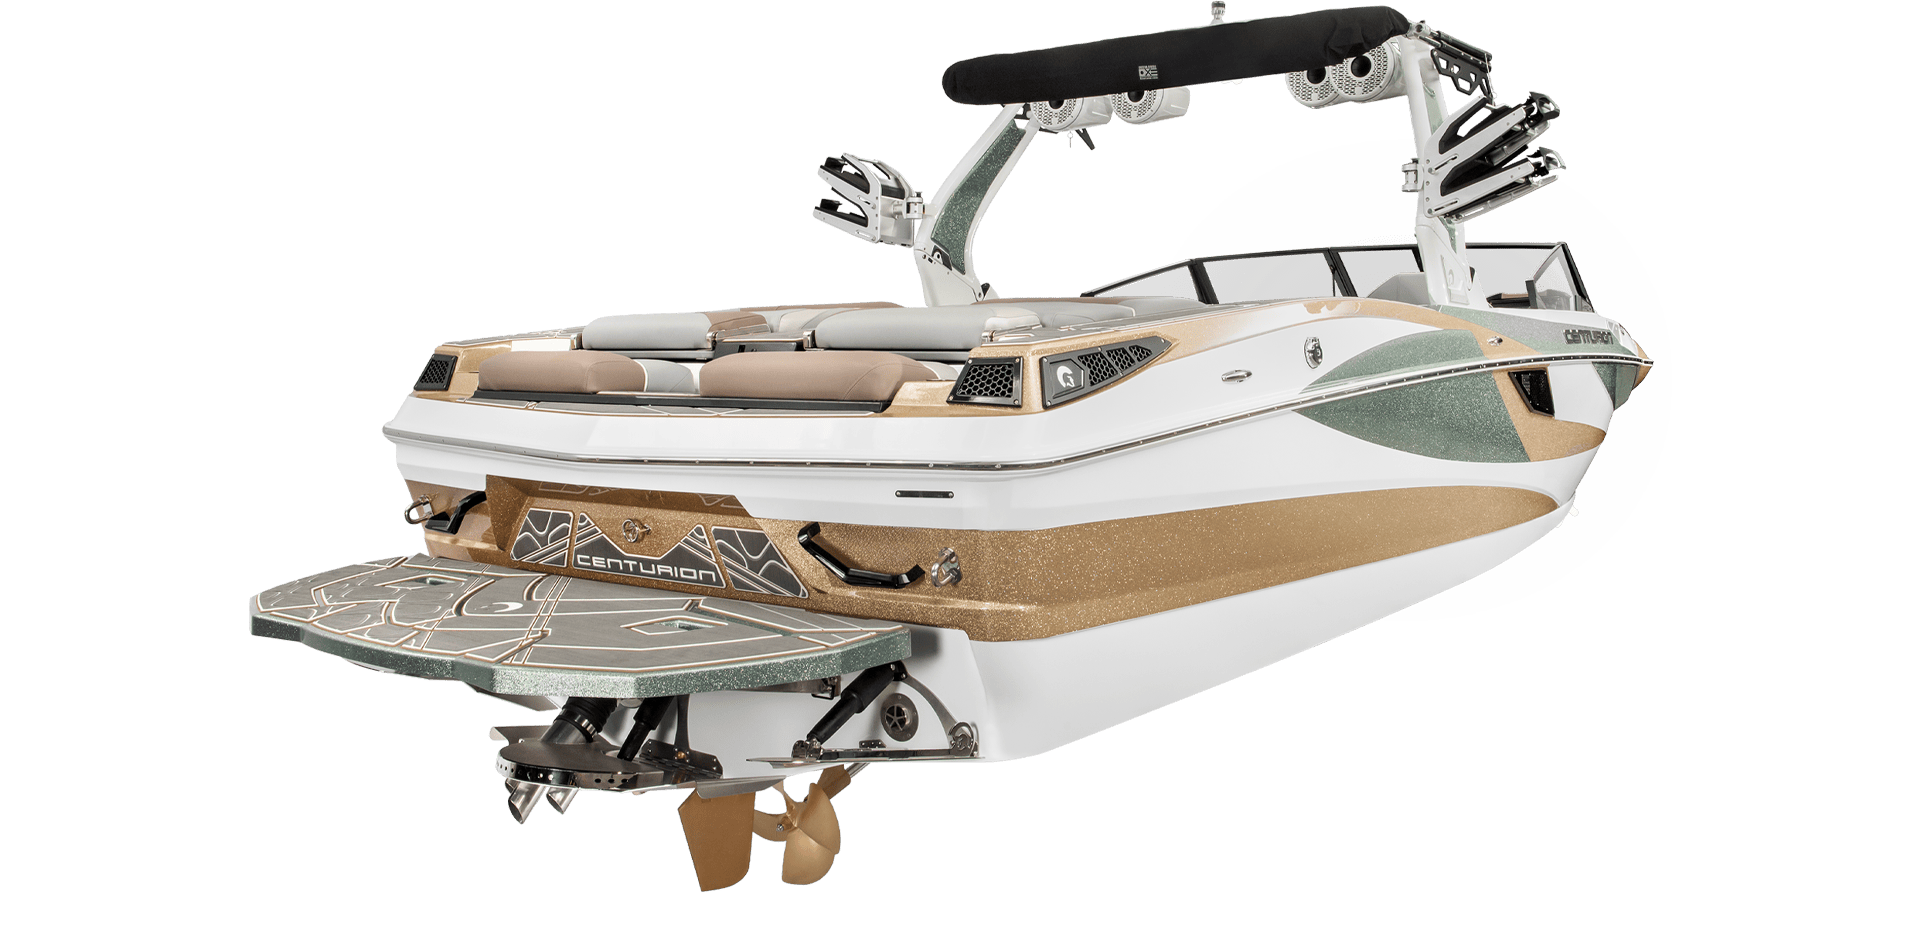 A white and gold Centurion wakeboard boat with cushioned seating, wakeboard racks, and a rear swim platform with a step ladder.